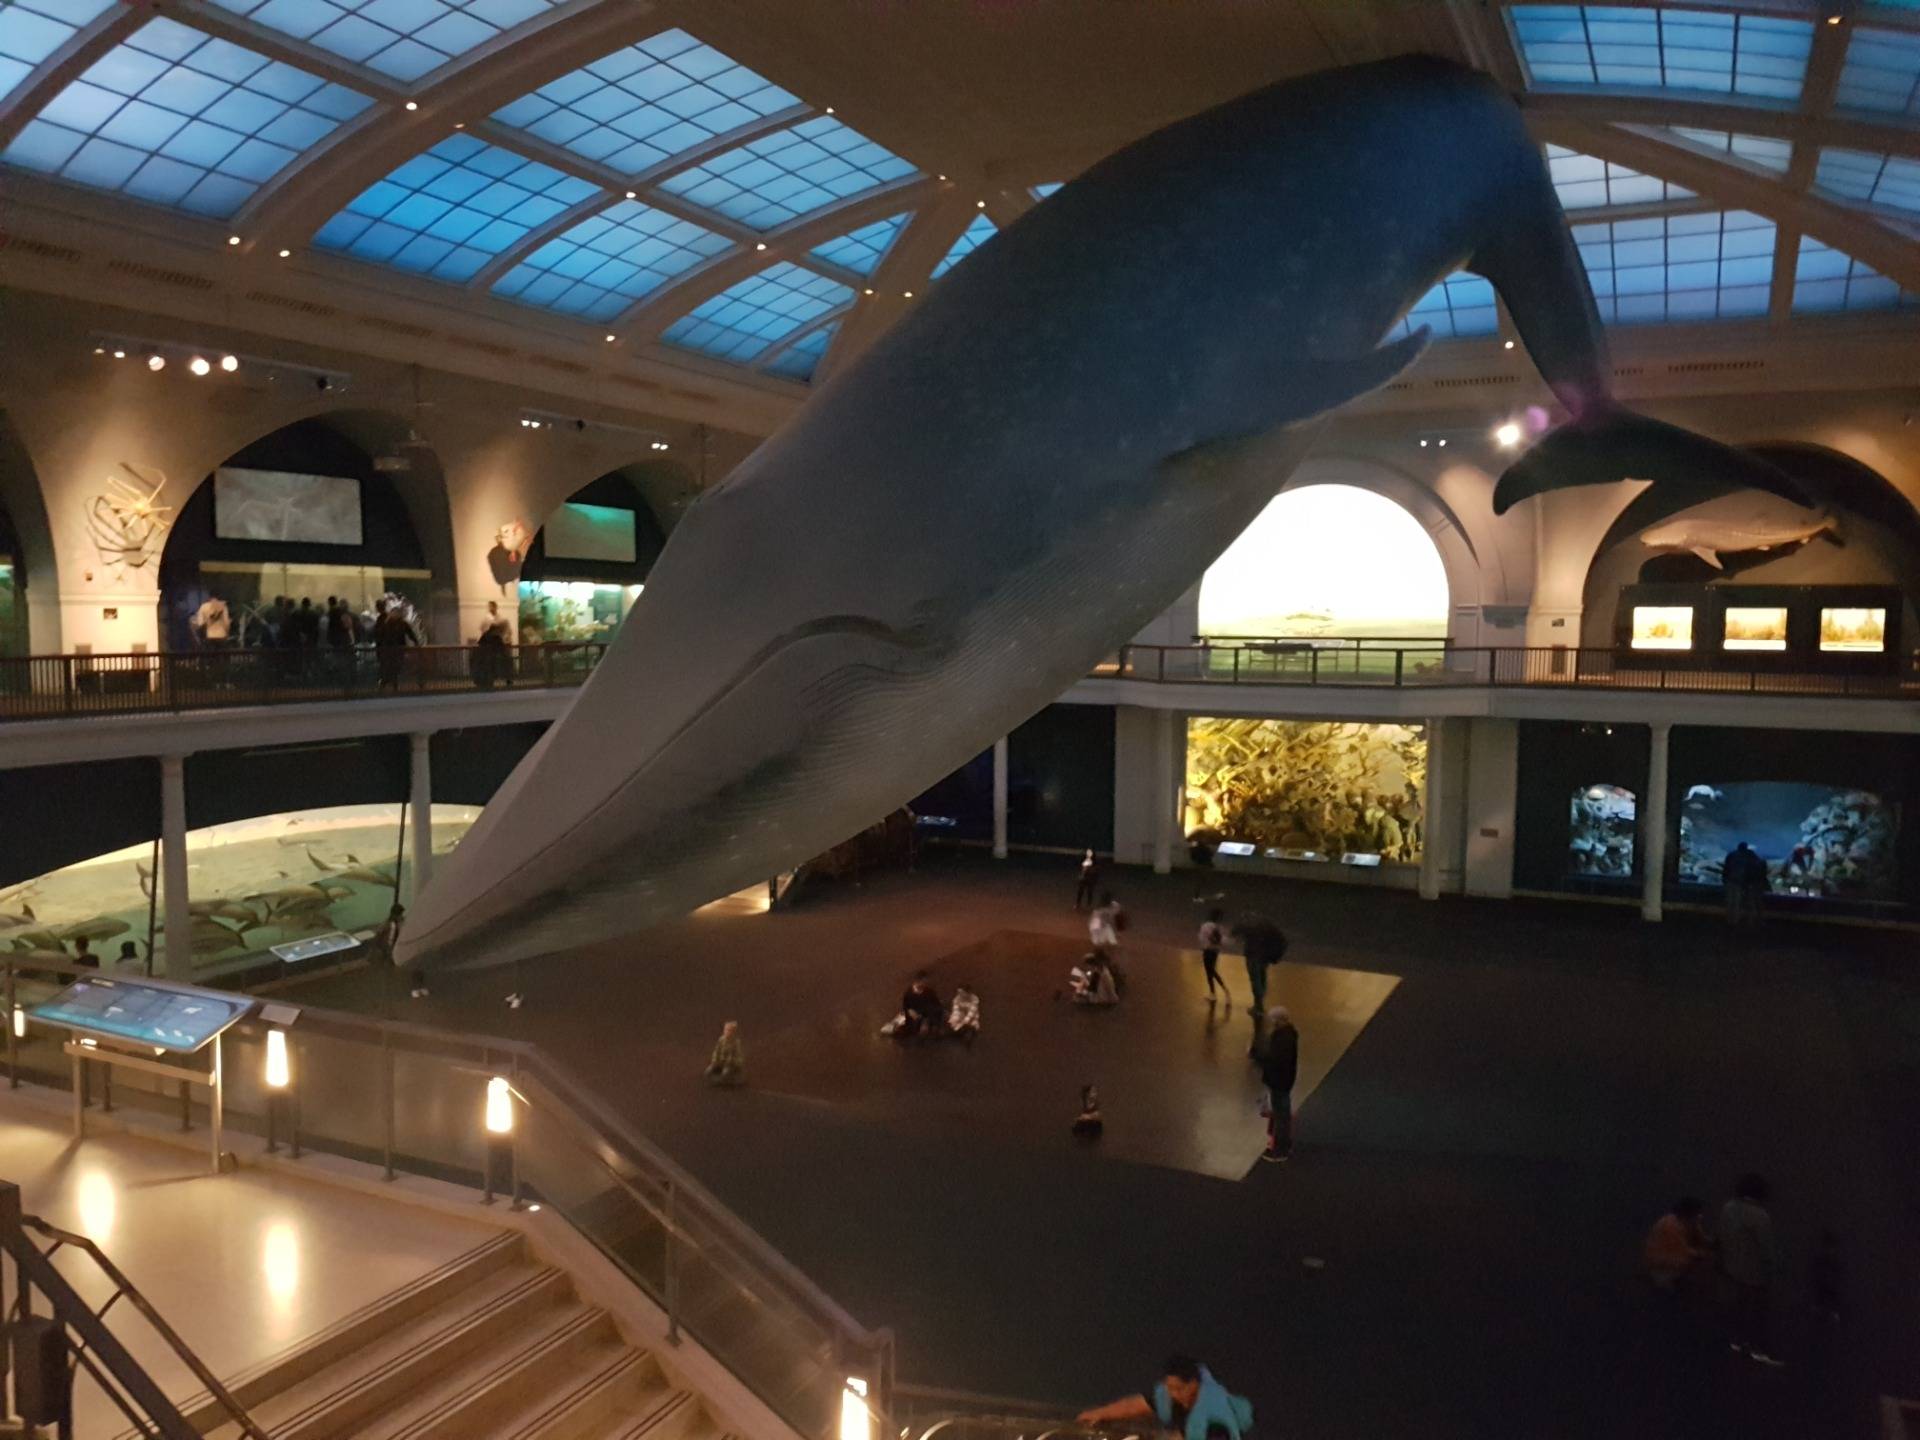 Model of a Blue Whale. This is an accurate model, making it astounding to stand near given that it’s 28 metres long. Huge!